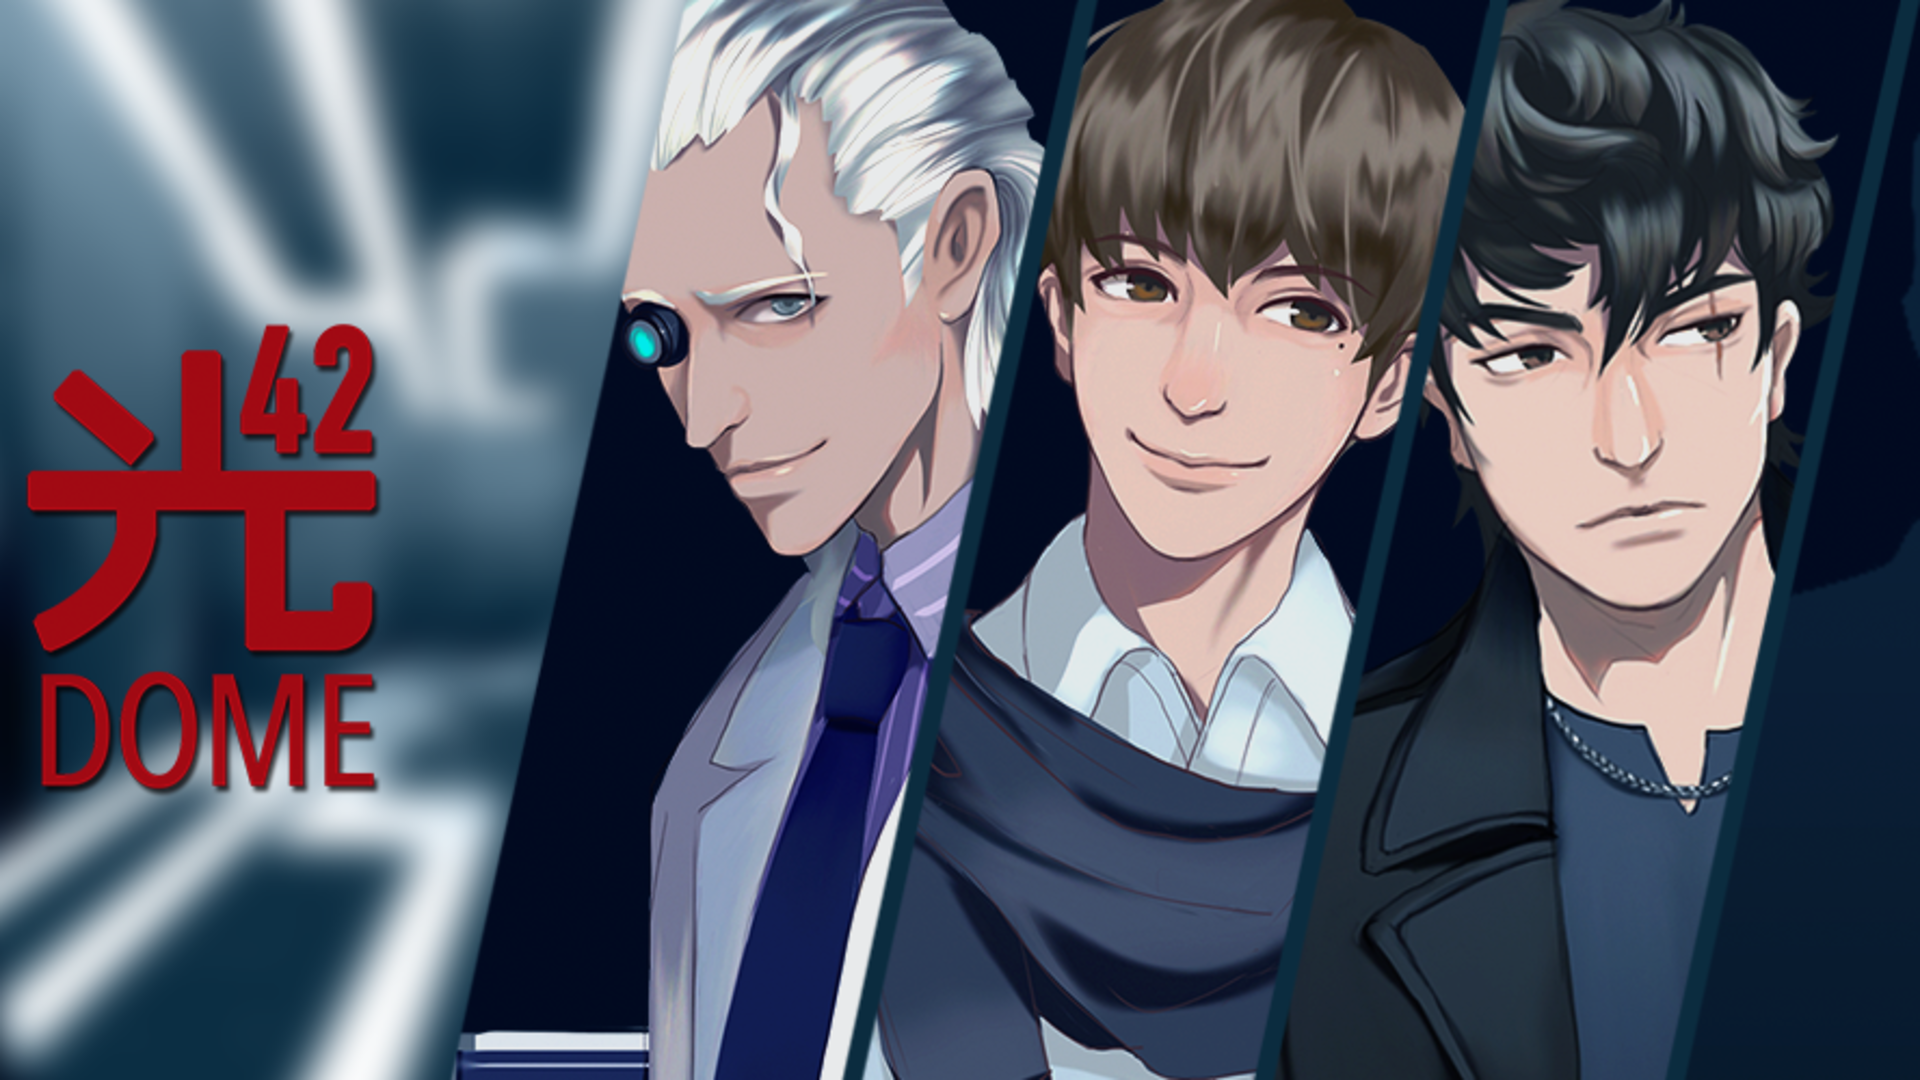 Banner of ライト 42 